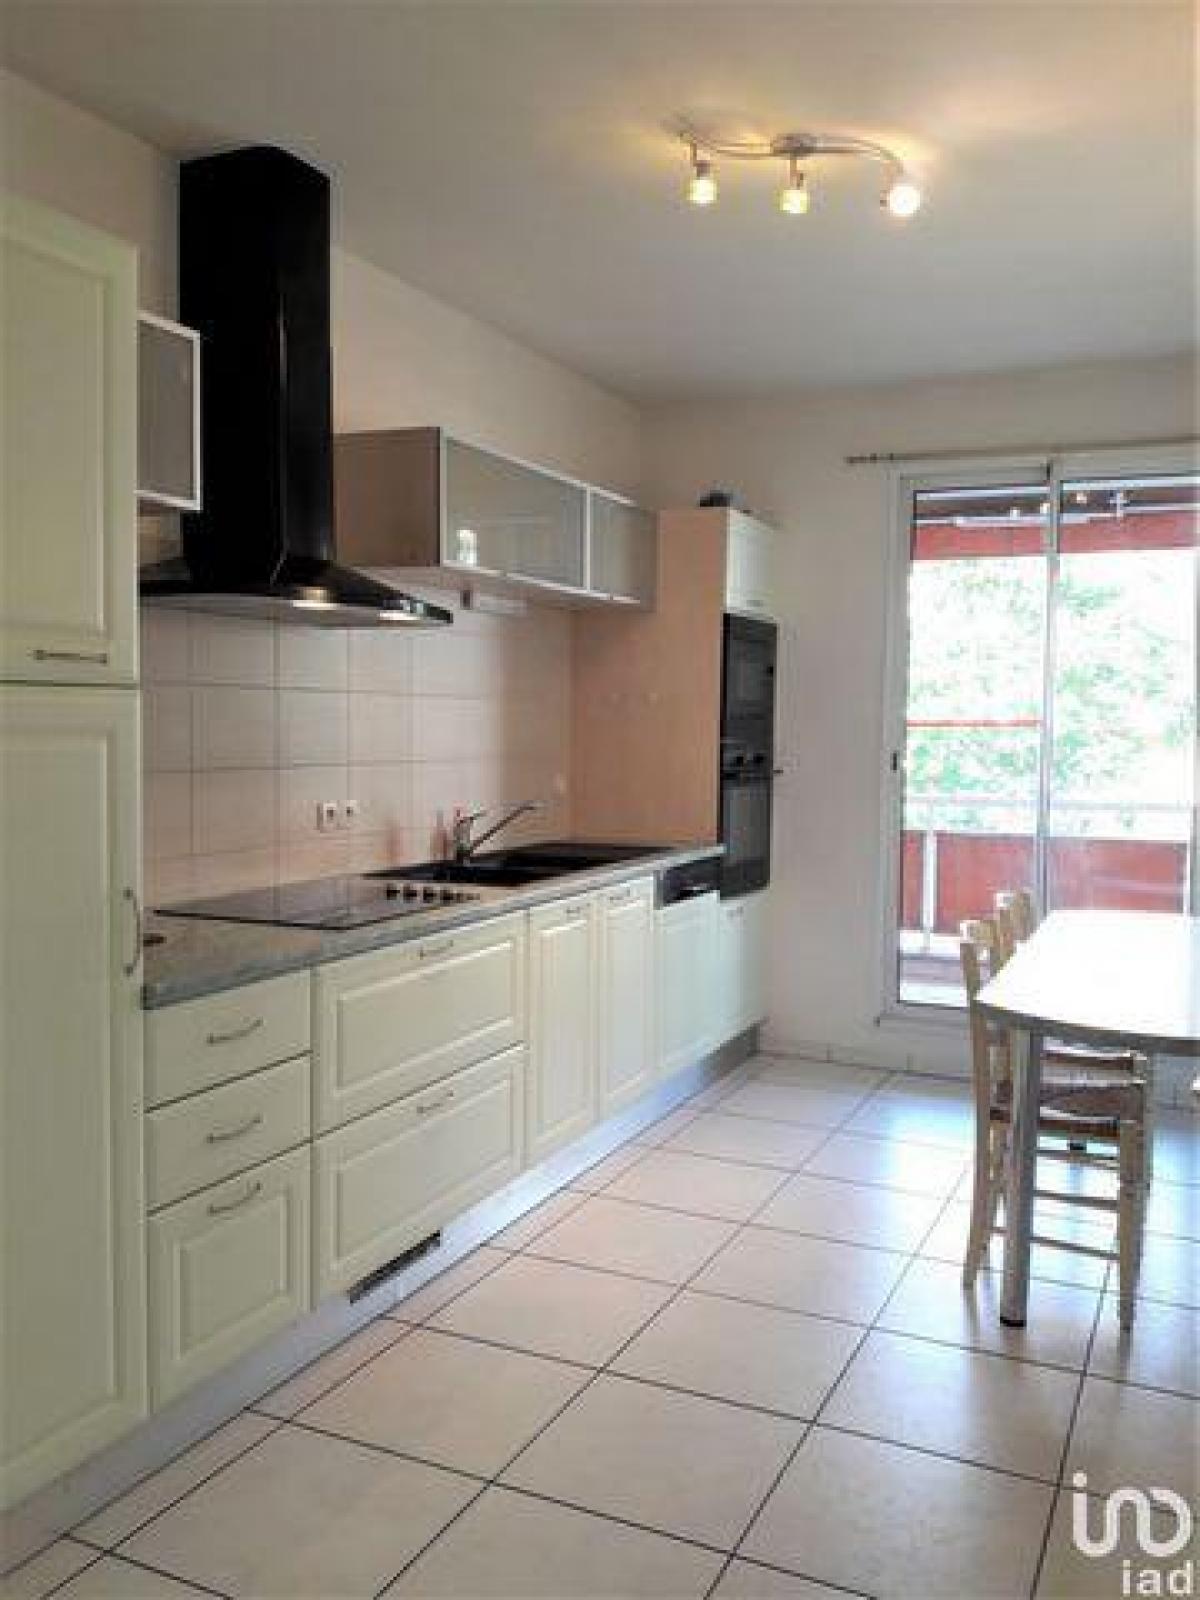 Picture of Condo For Sale in Draguignan, Provence-Alpes-Cote d'Azur, France